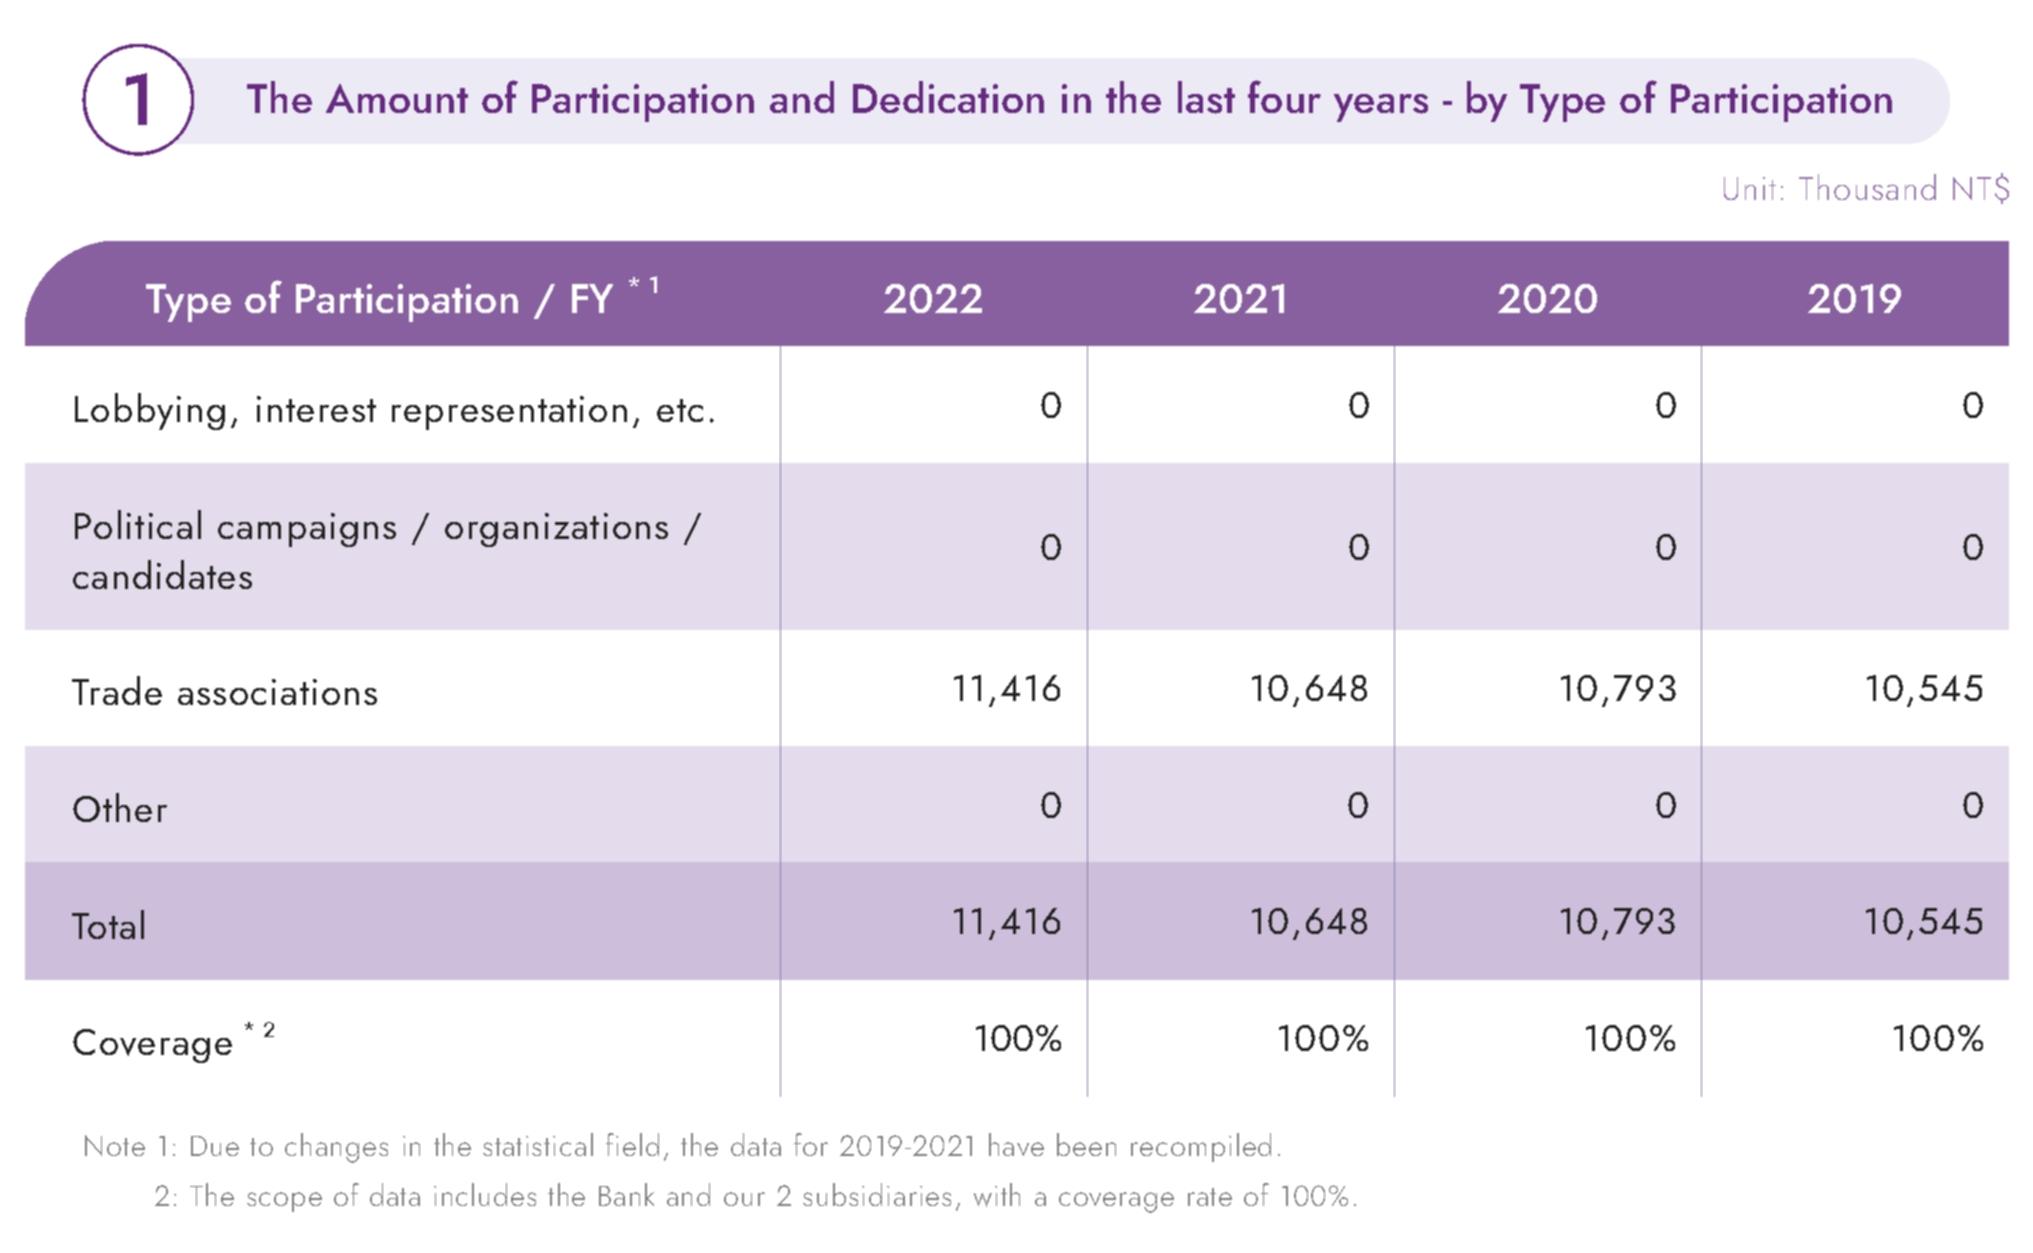 The Amount of Participation and Dedication in the last four years - by Type of Participation